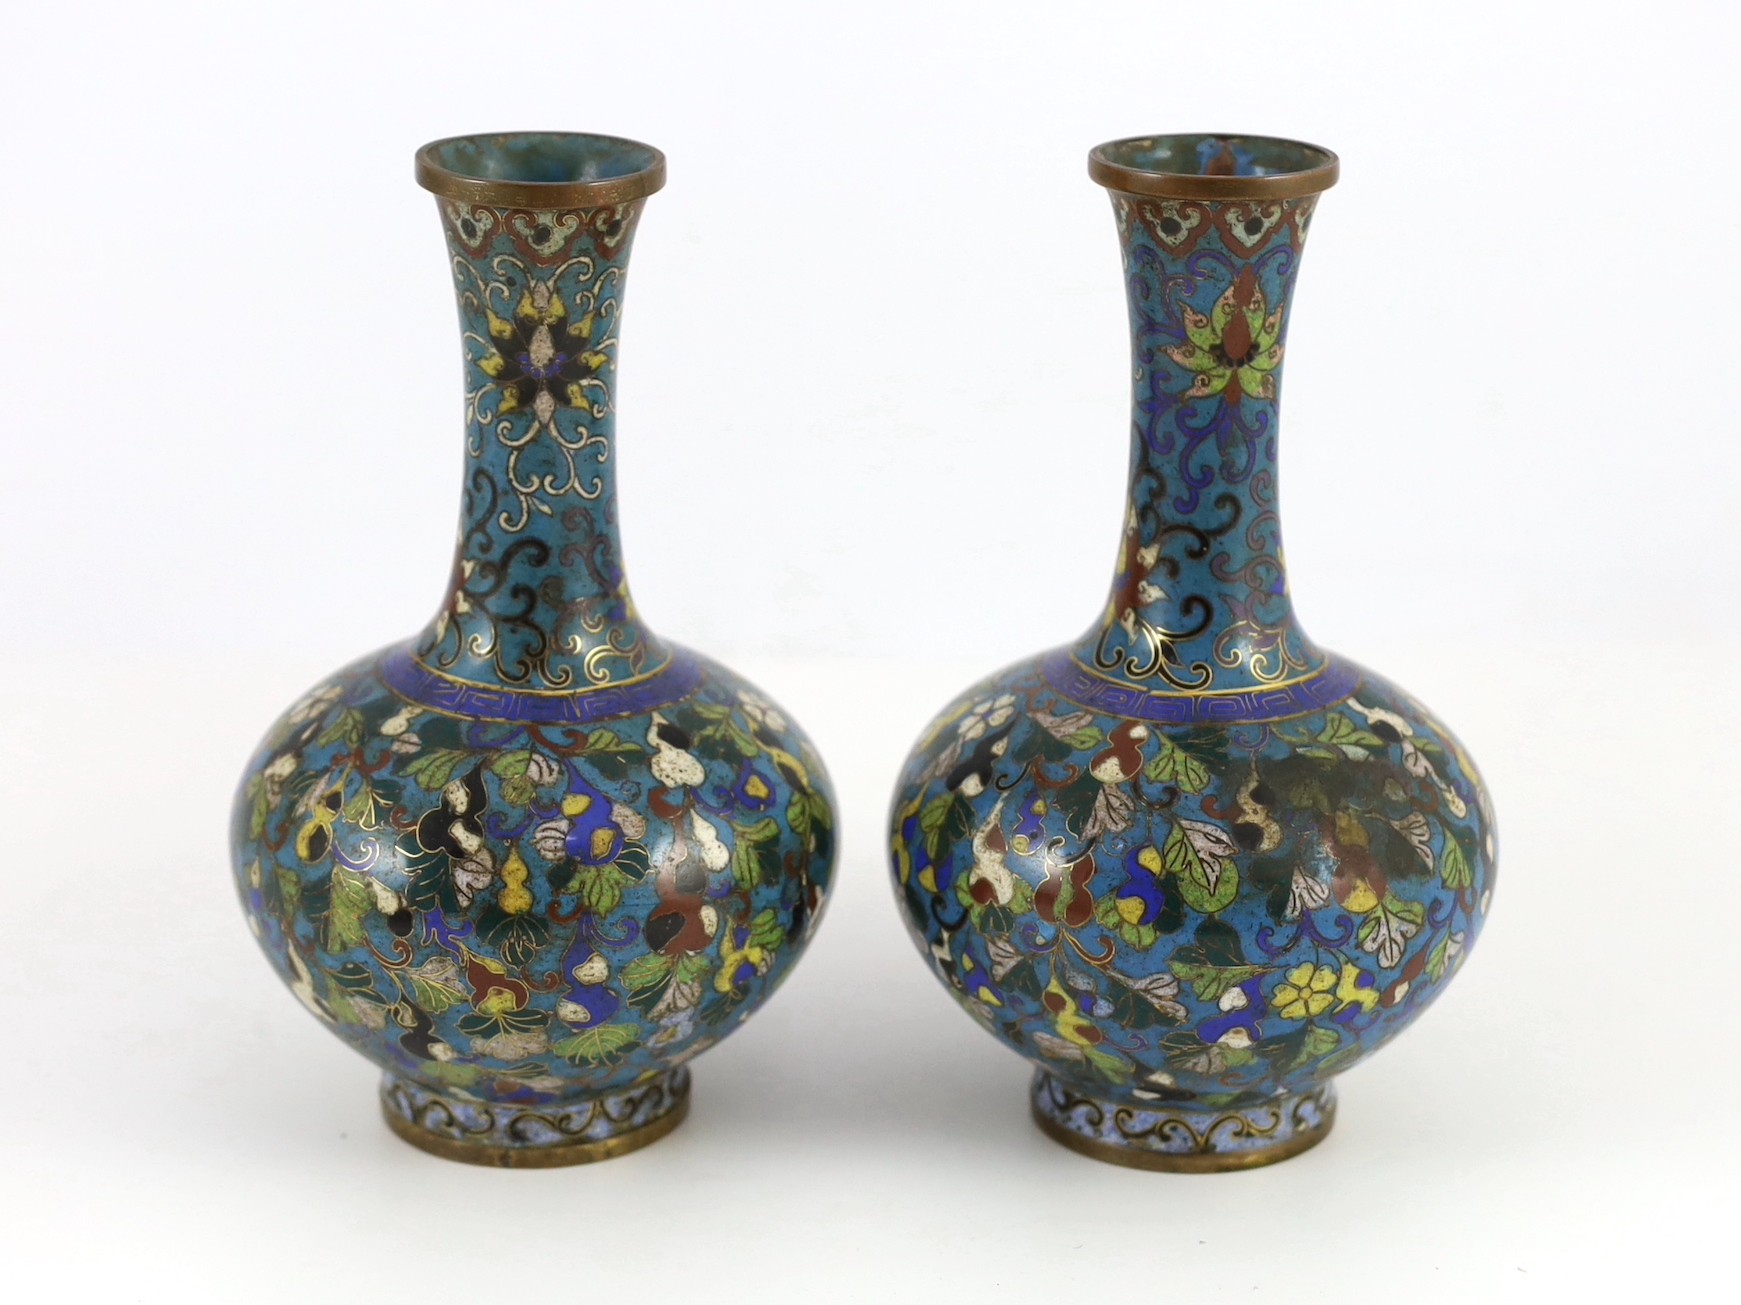 A pair of Chinese cloisonné enamel ‘gourd vine’ vases, early 19th century, 18cm high